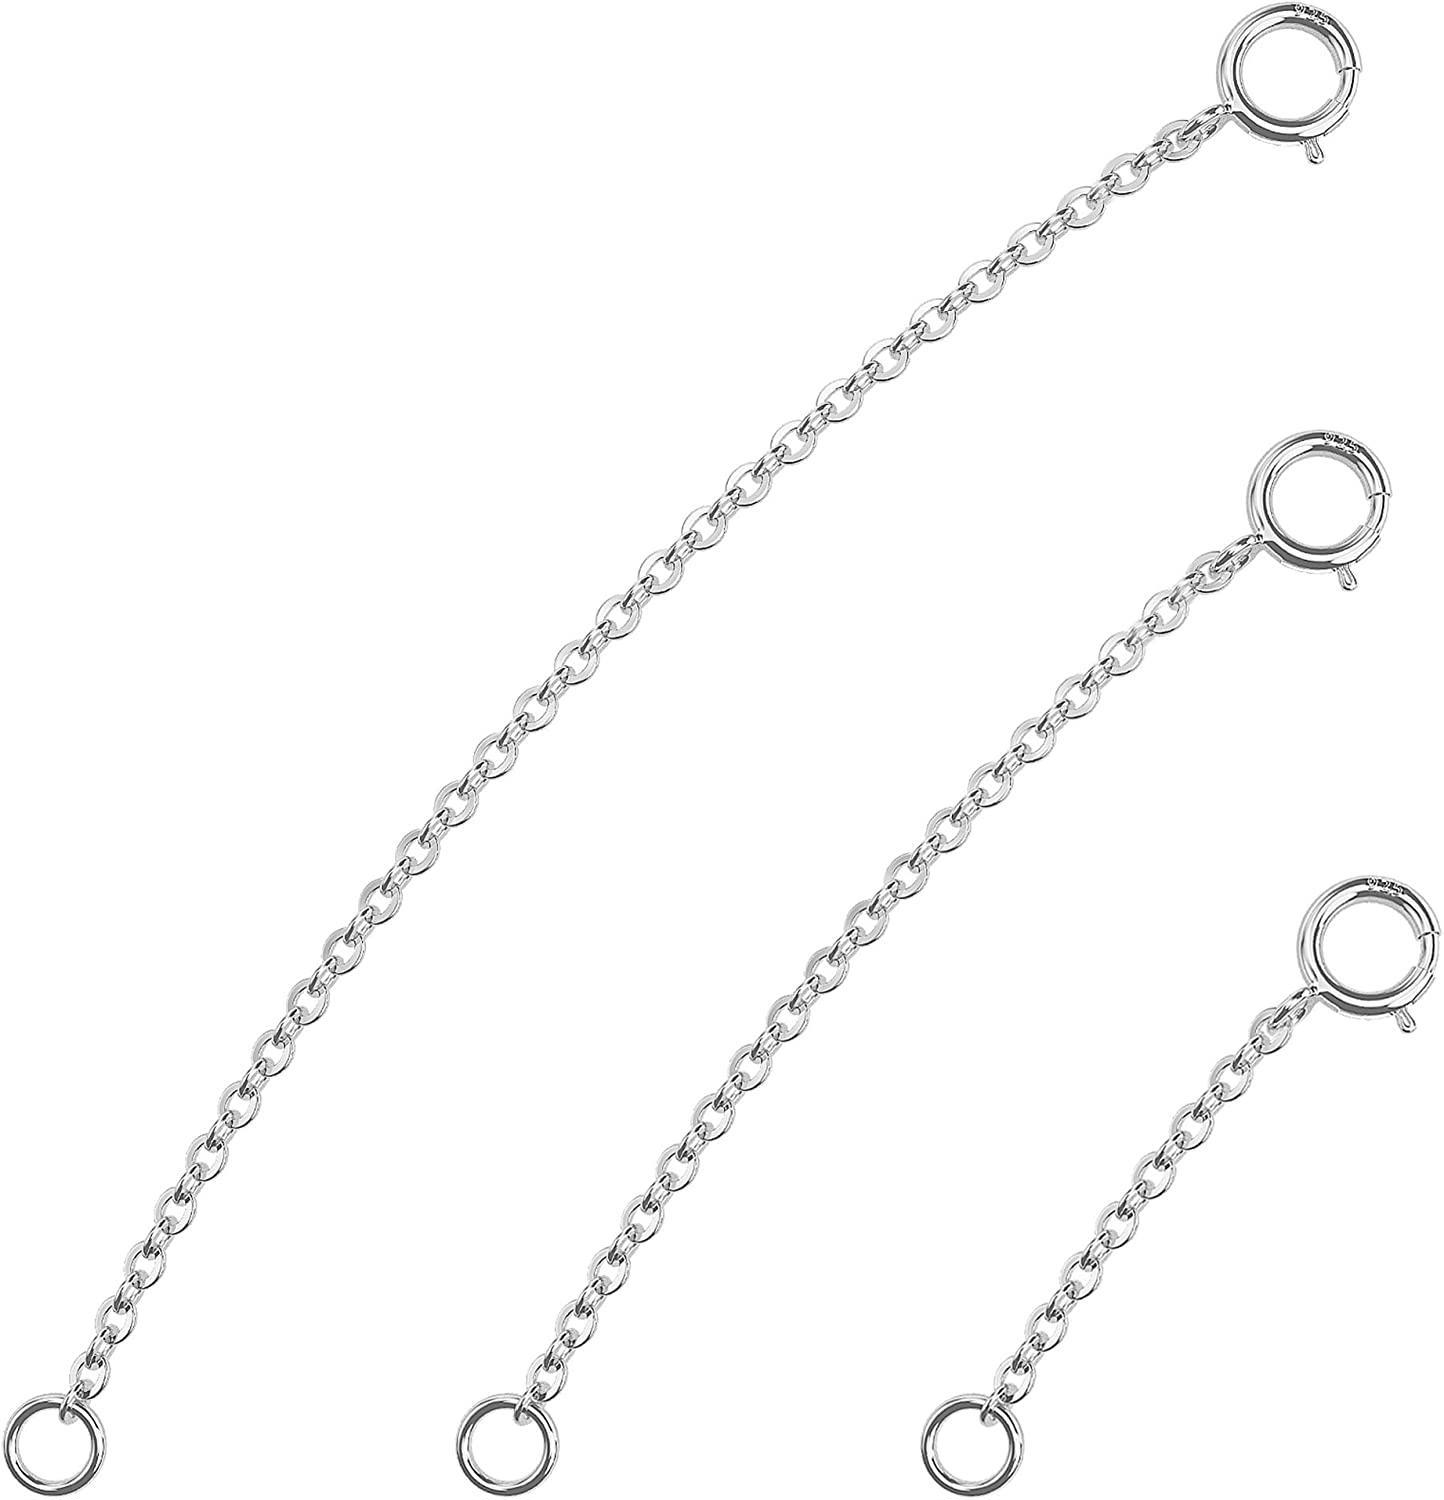 3Pcs 925 Sterling Silver Necklace Extender Chain Extenders for